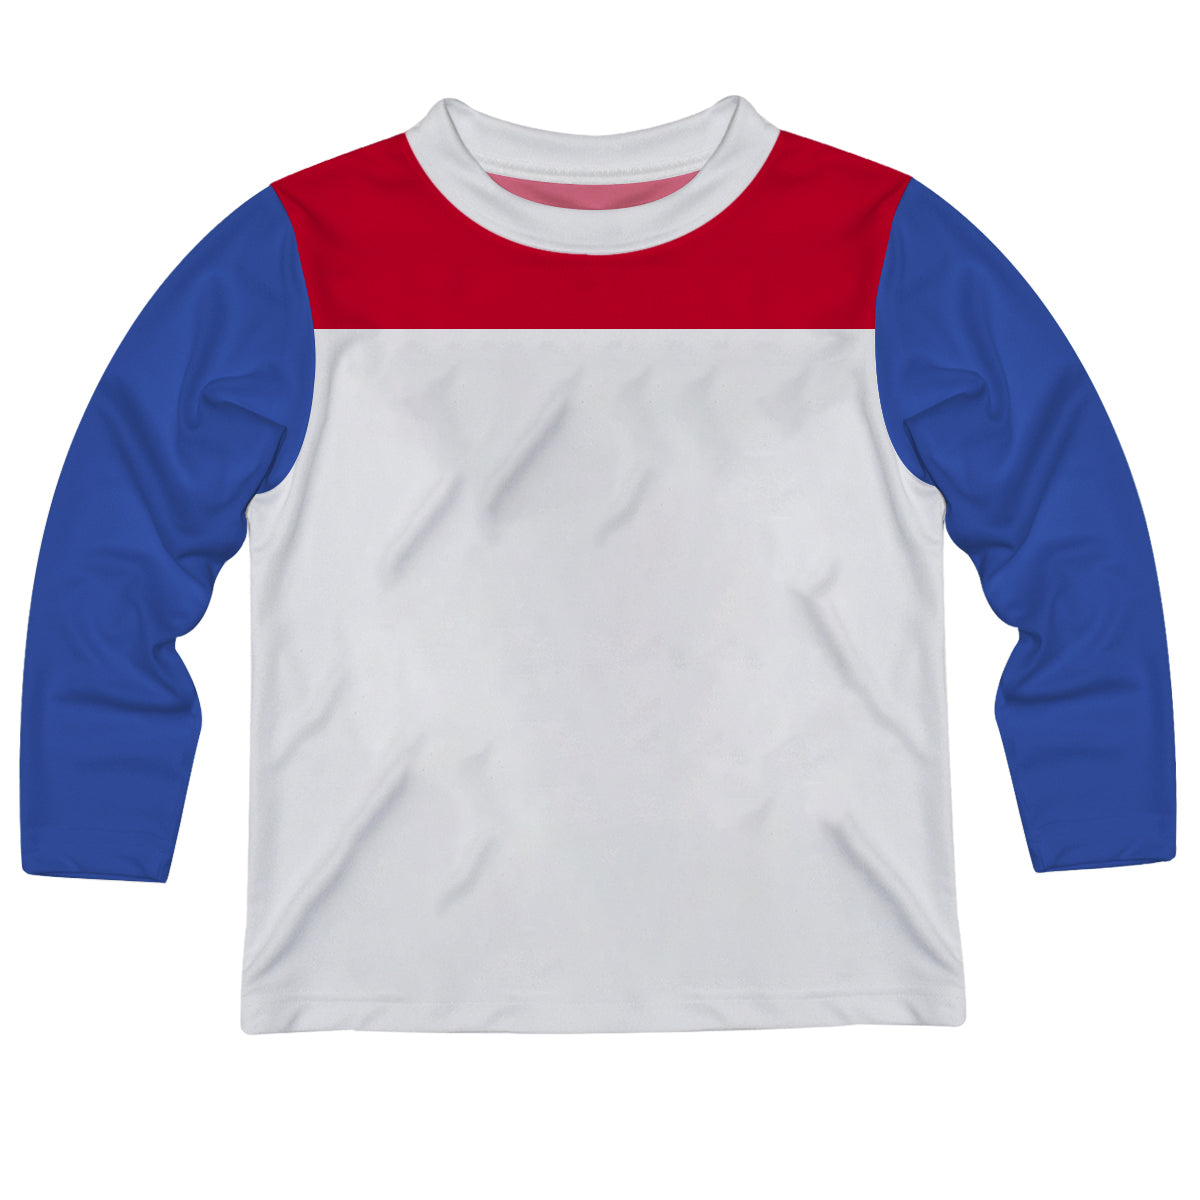 Personalized Initial Name White Red and Blue Long Sleeve Tee Shirt - Wimziy&Co.